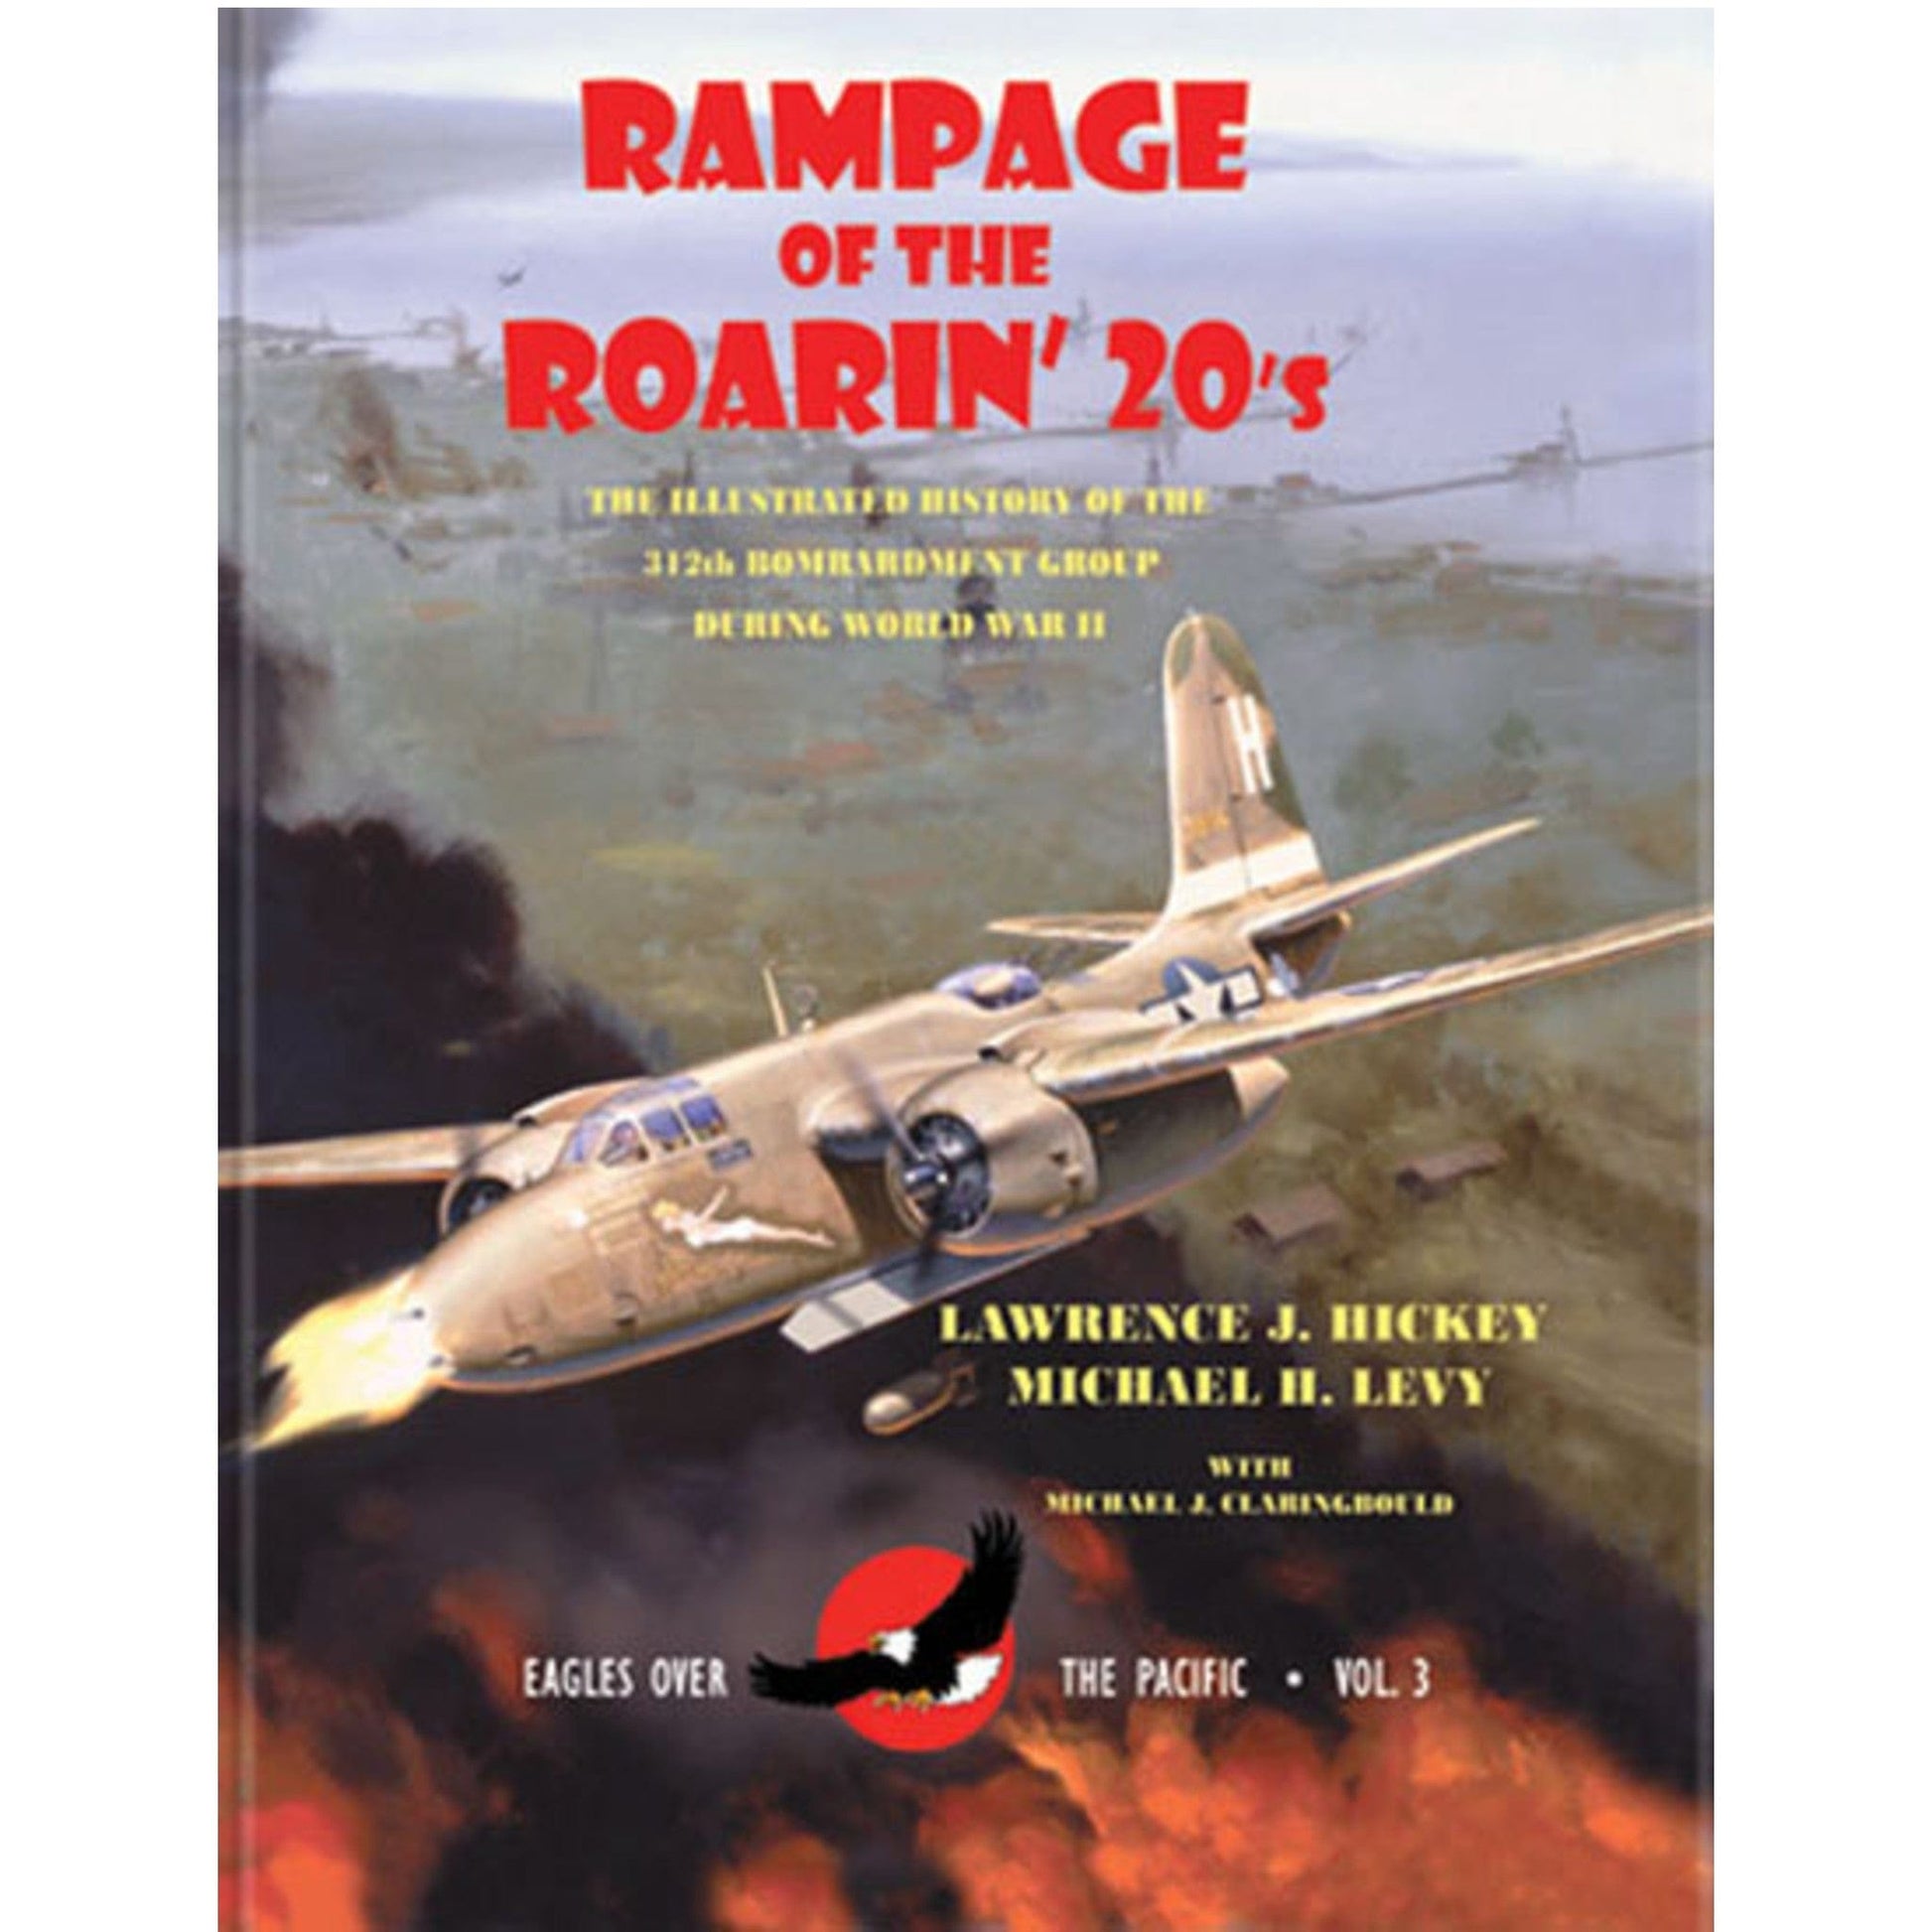 "Rampage of the Roarin’ 20’s" - by author Lawrence J. Hickey from The History List Store